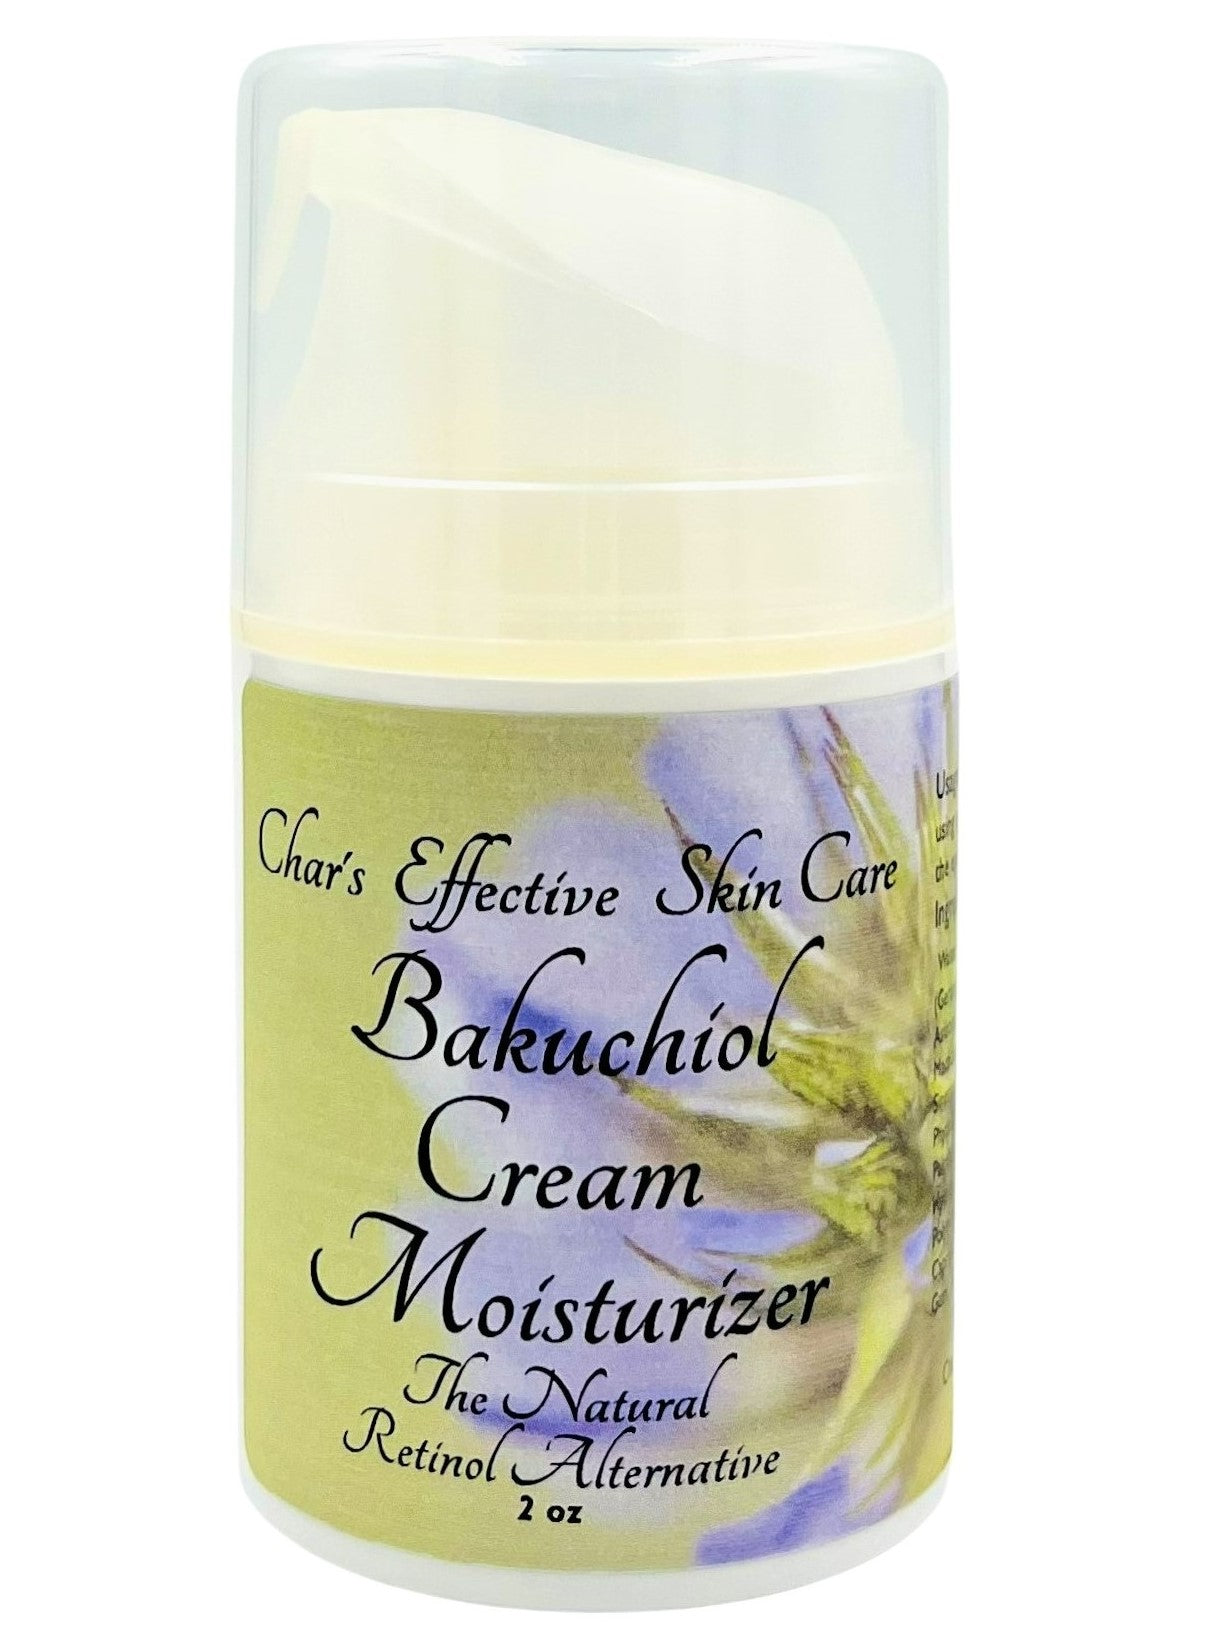 Bakuchiol Cream The Natural Retinol Alternative (3%)/ Also Includes Ceramides, Botanicals, Hyaluronic Acid, Matrixyl 3000 & much more/2 oz white airless pump bottle with floral label/Char's Effective Skin Care